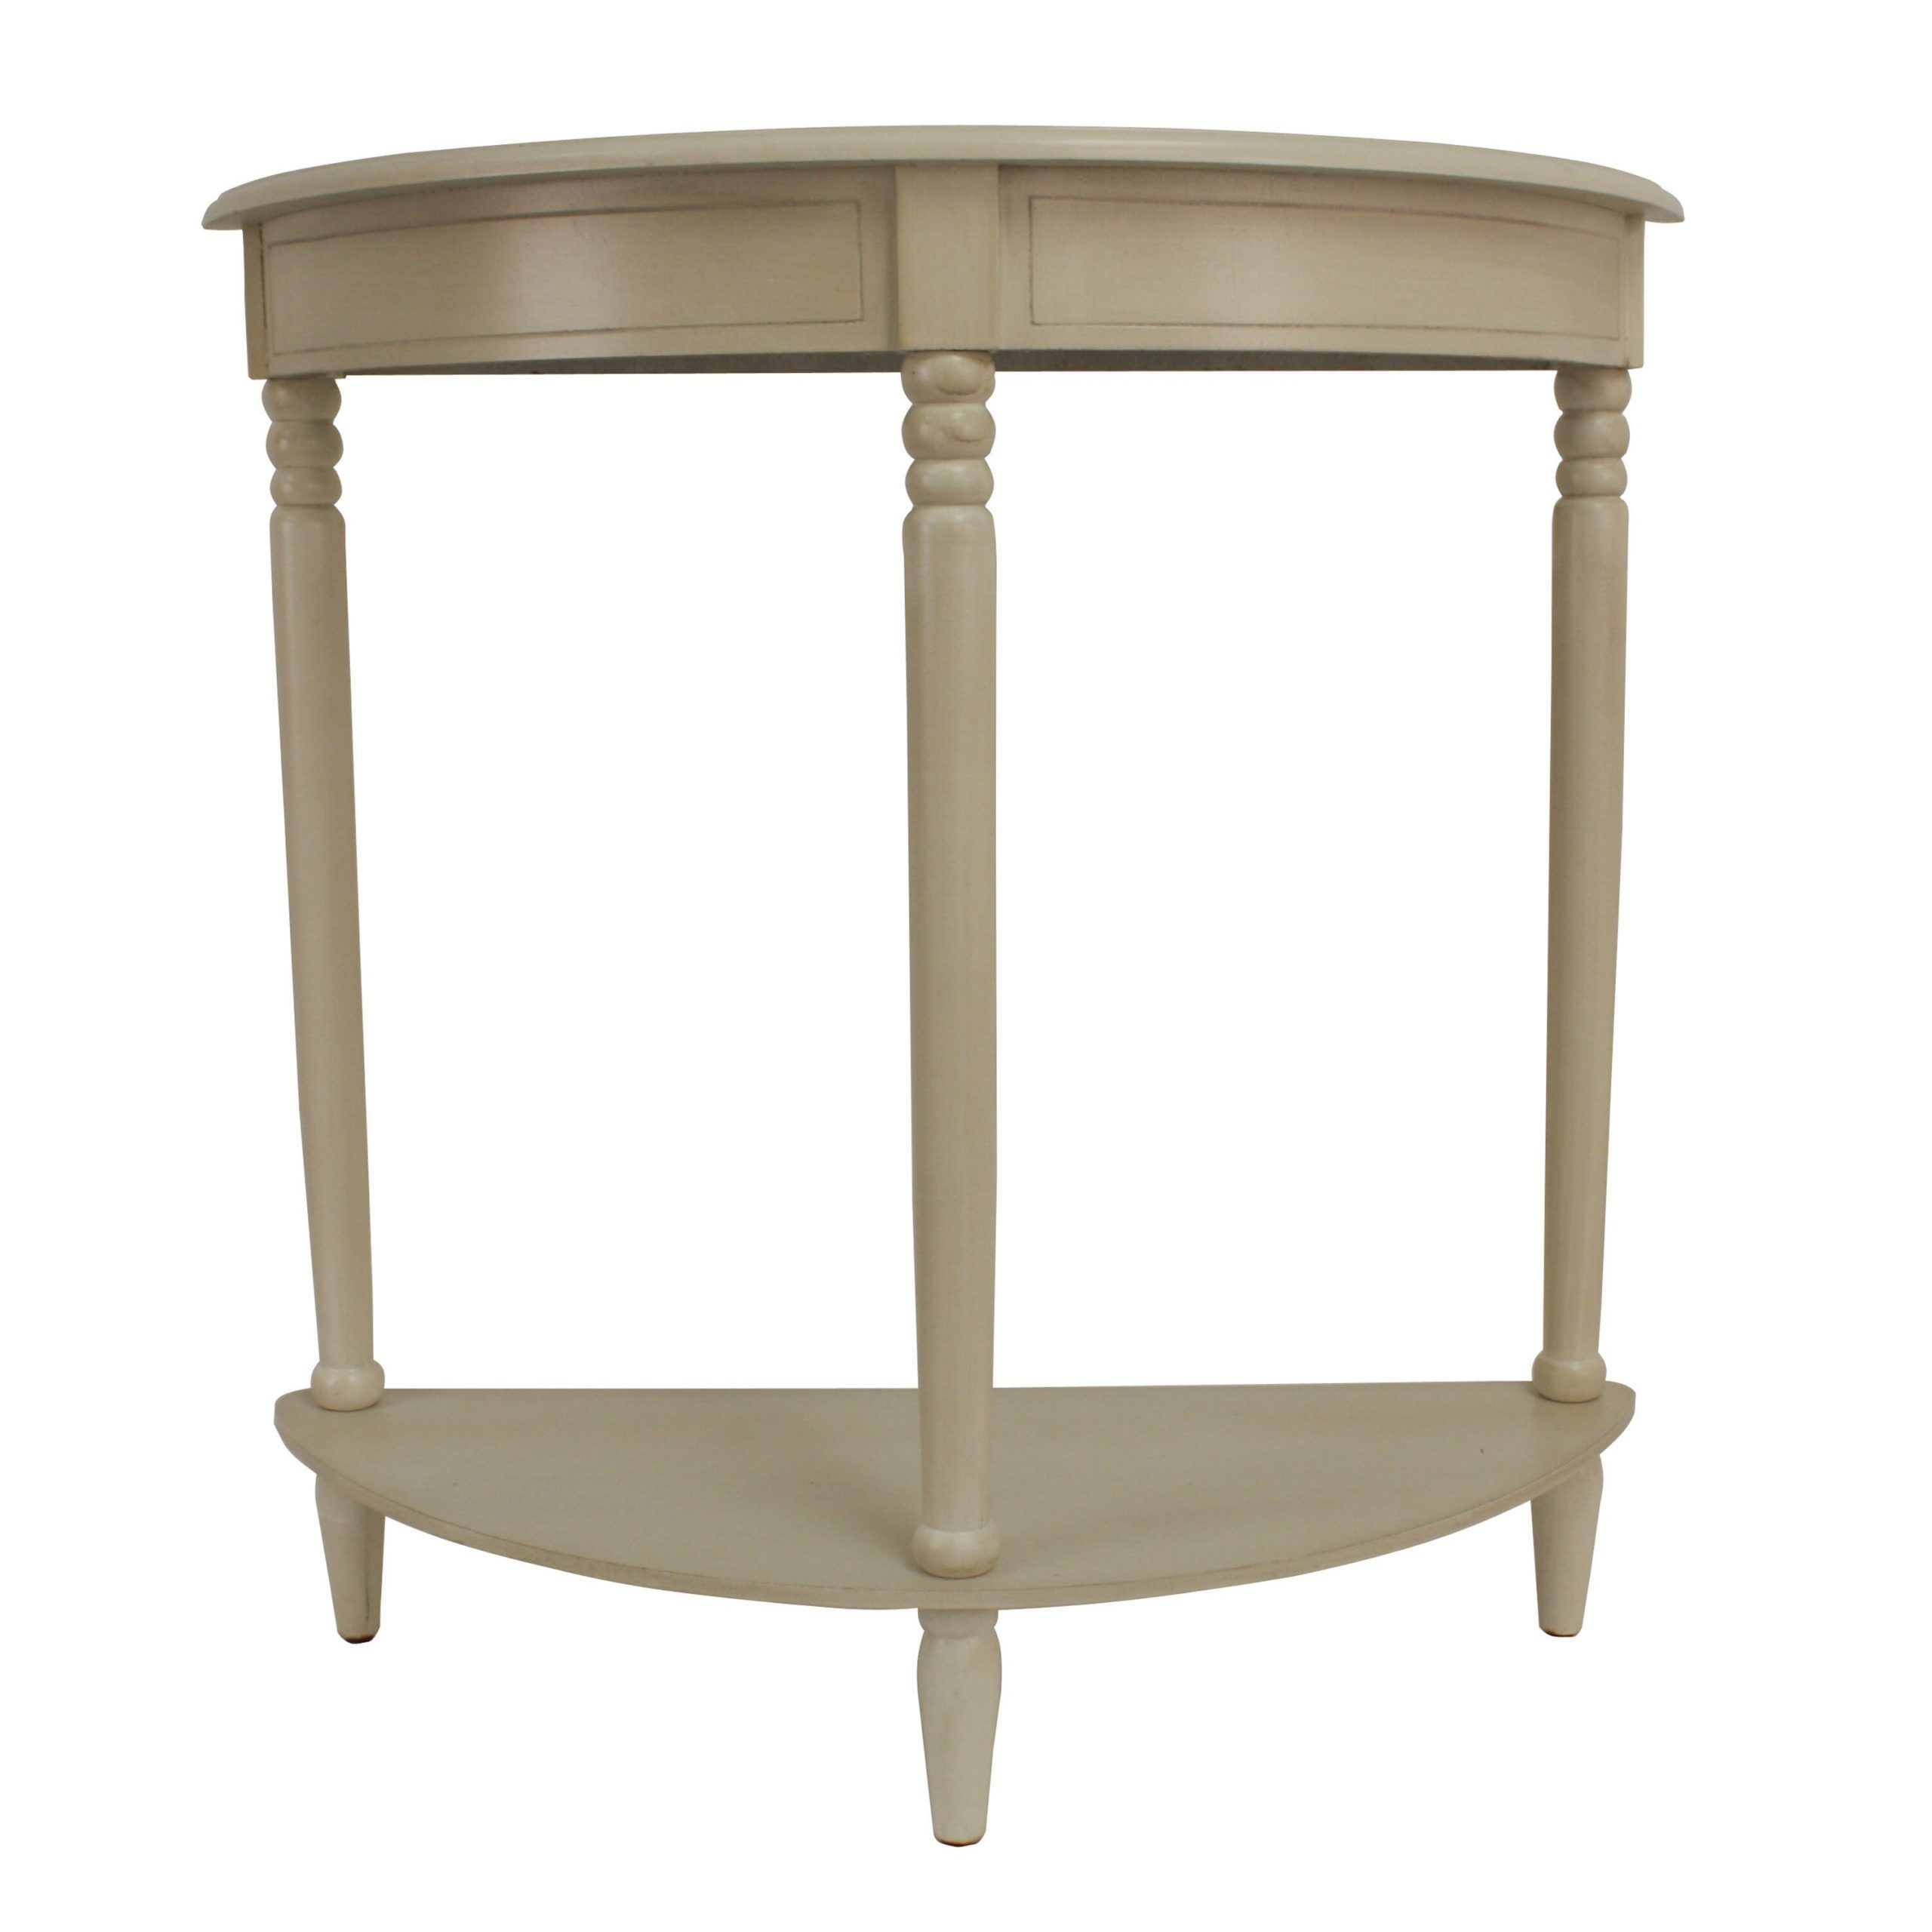 Decor Therapy Simplicity Half Moon Console Table & Reviews With Round Console Tables (View 9 of 20)